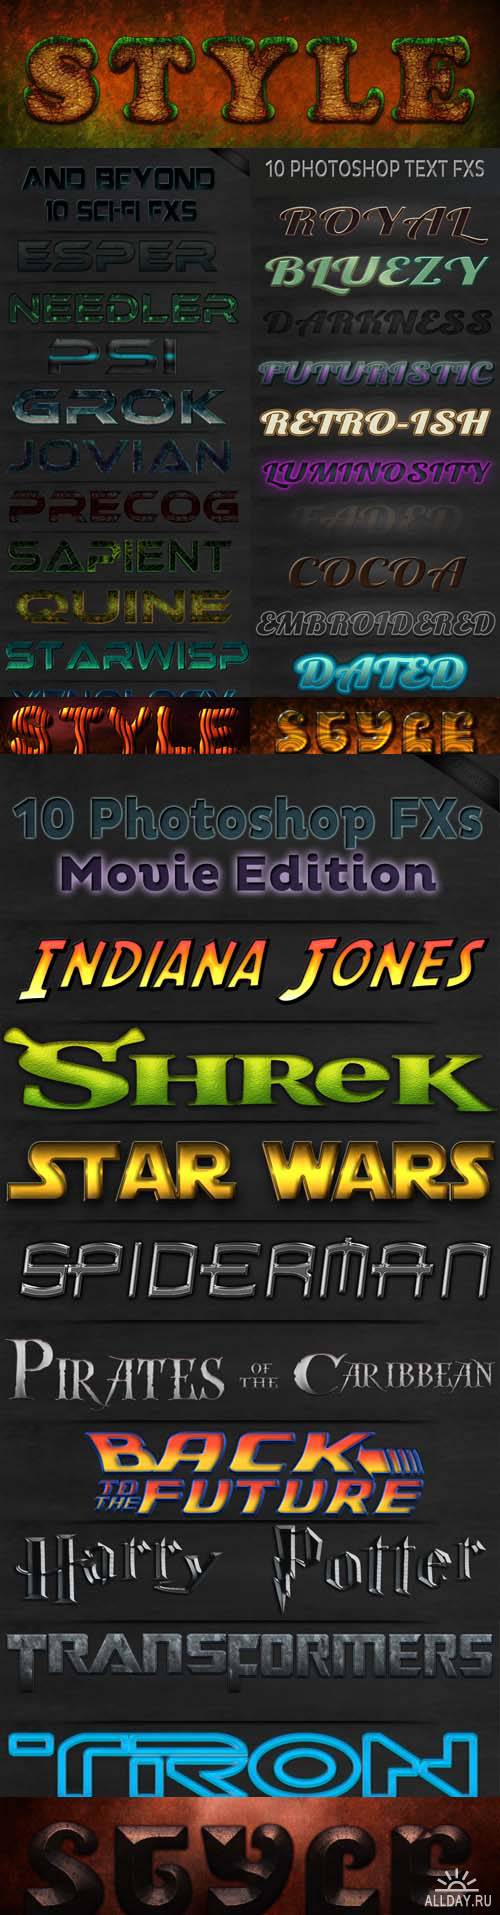 Cool Photoshop Text Styles pack # 6